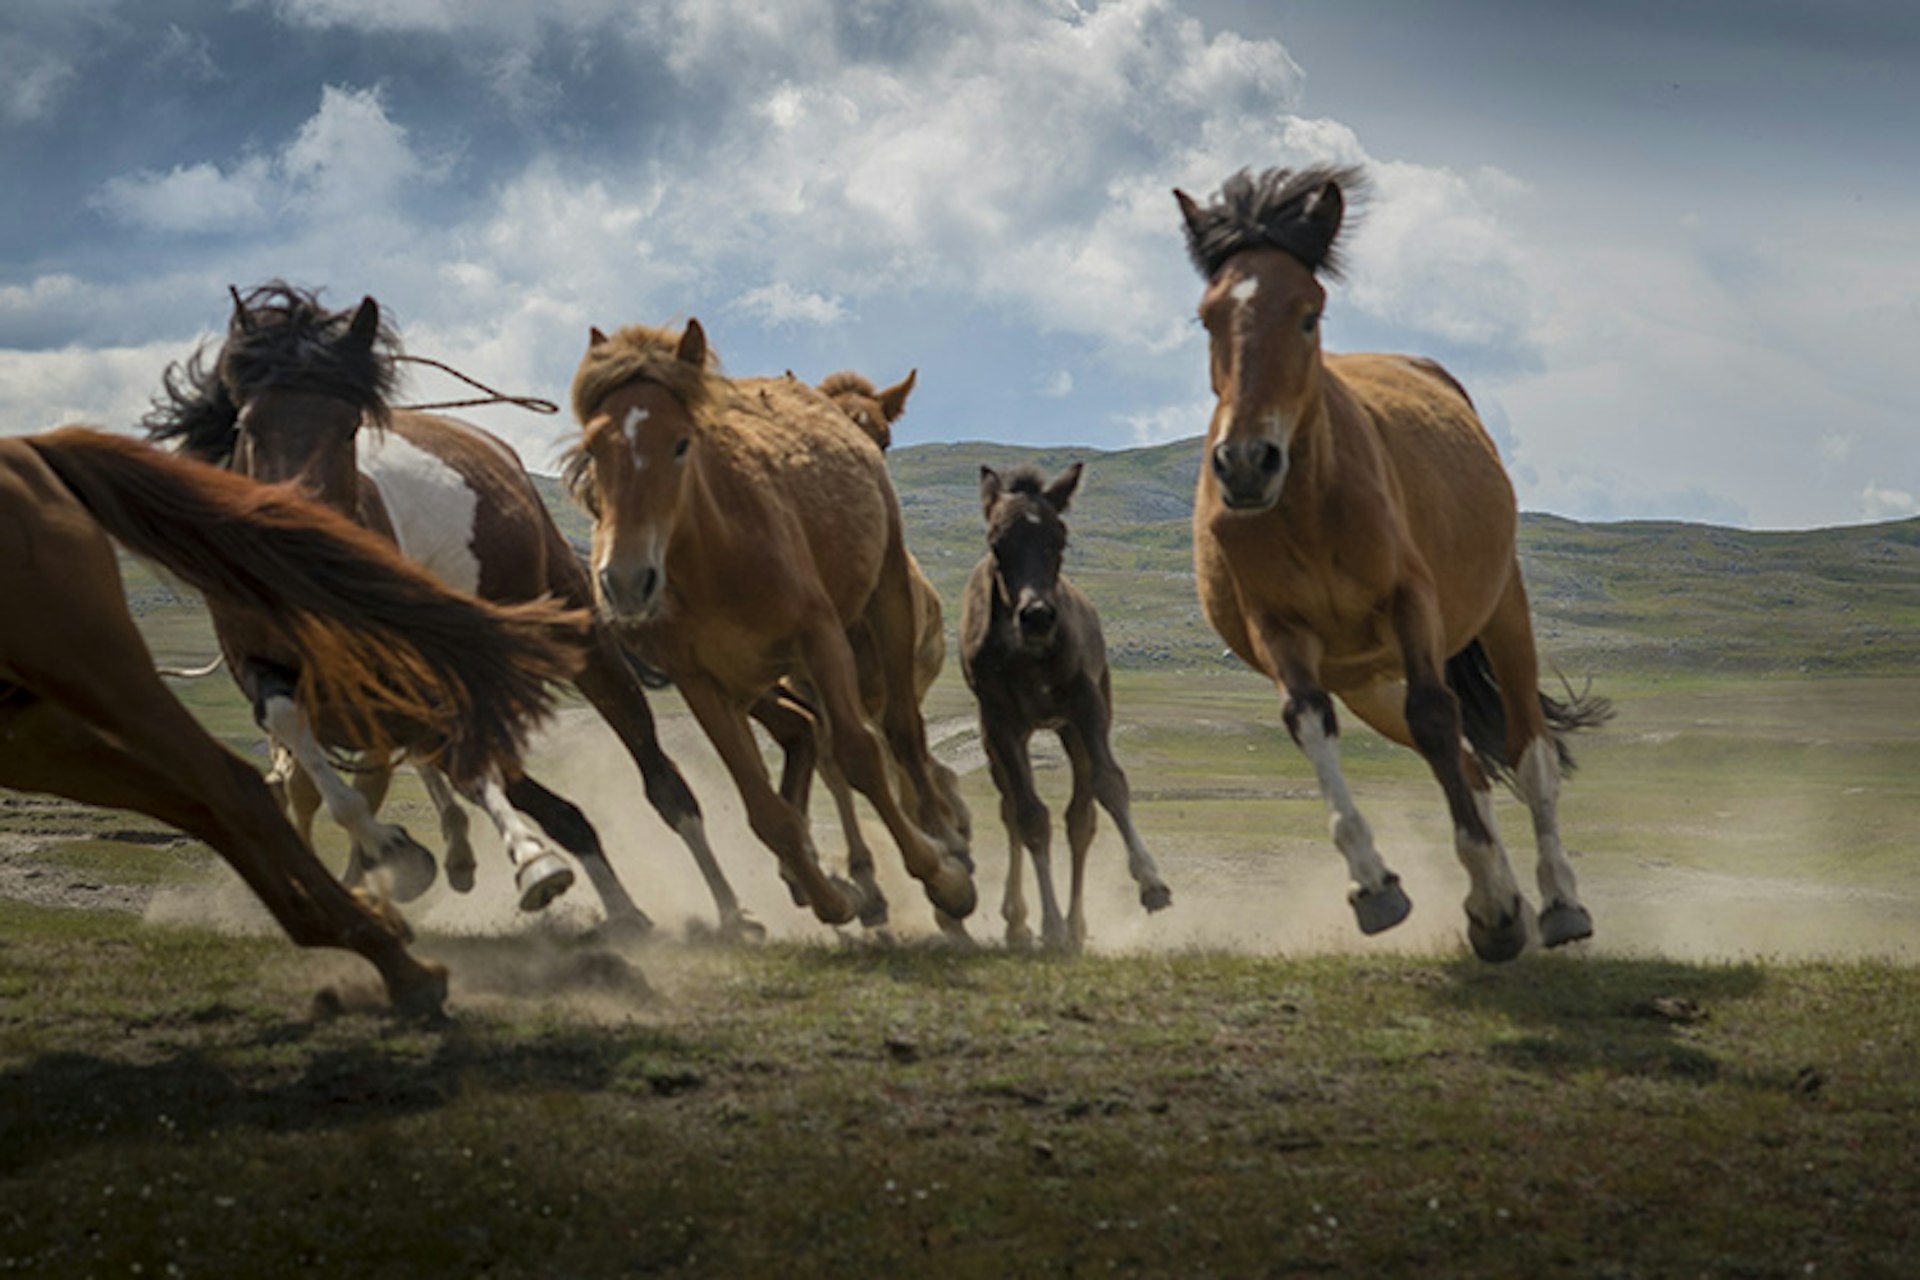 The annual July stampede. Image by David Baxendale / Lonely Planet